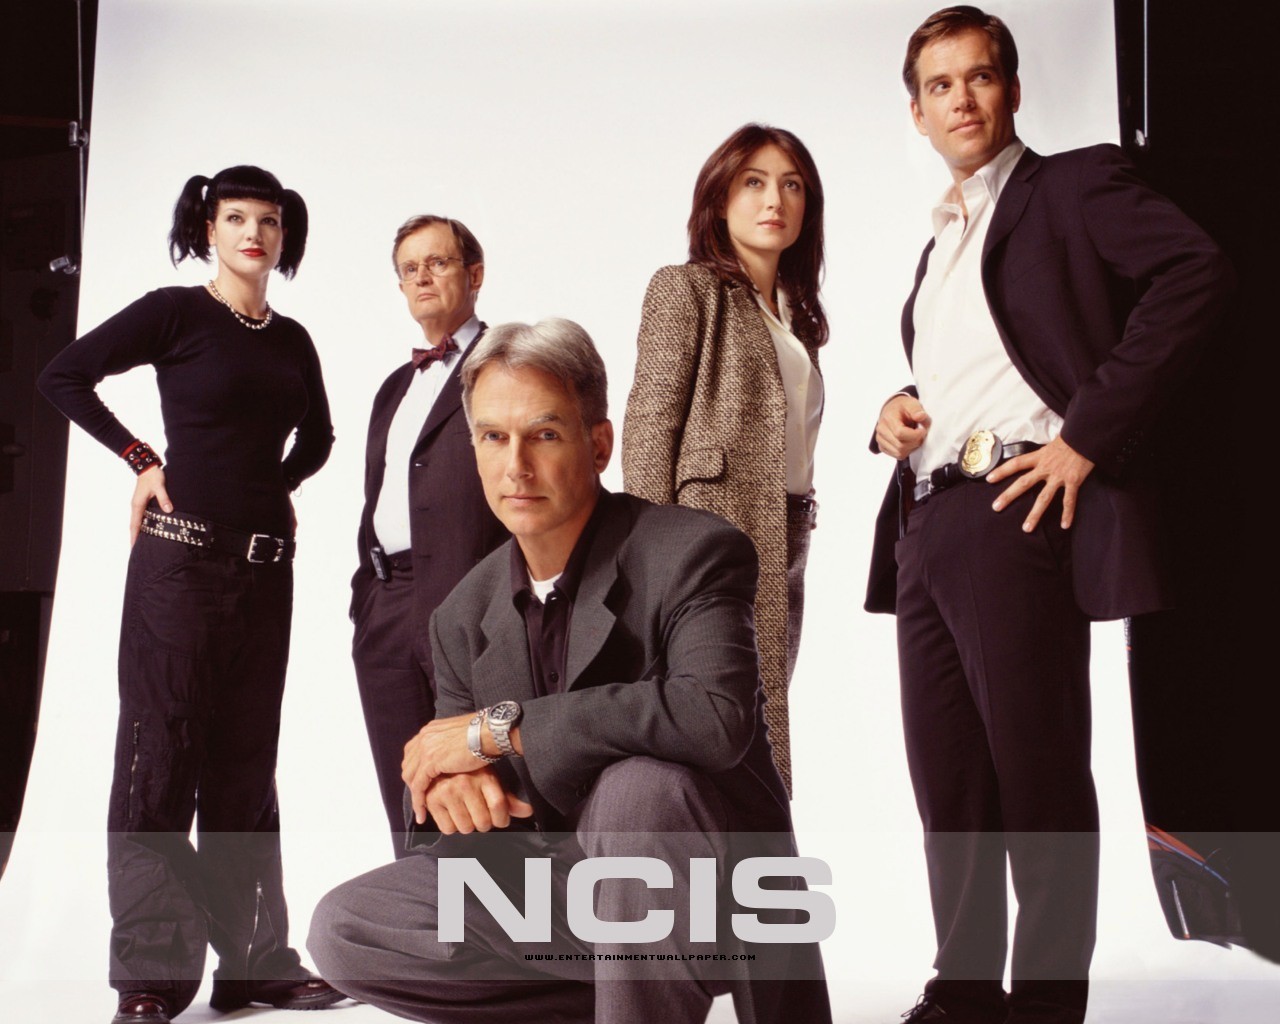 ncis wallpaper,album cover,photography,white collar worker,suit,fictional character